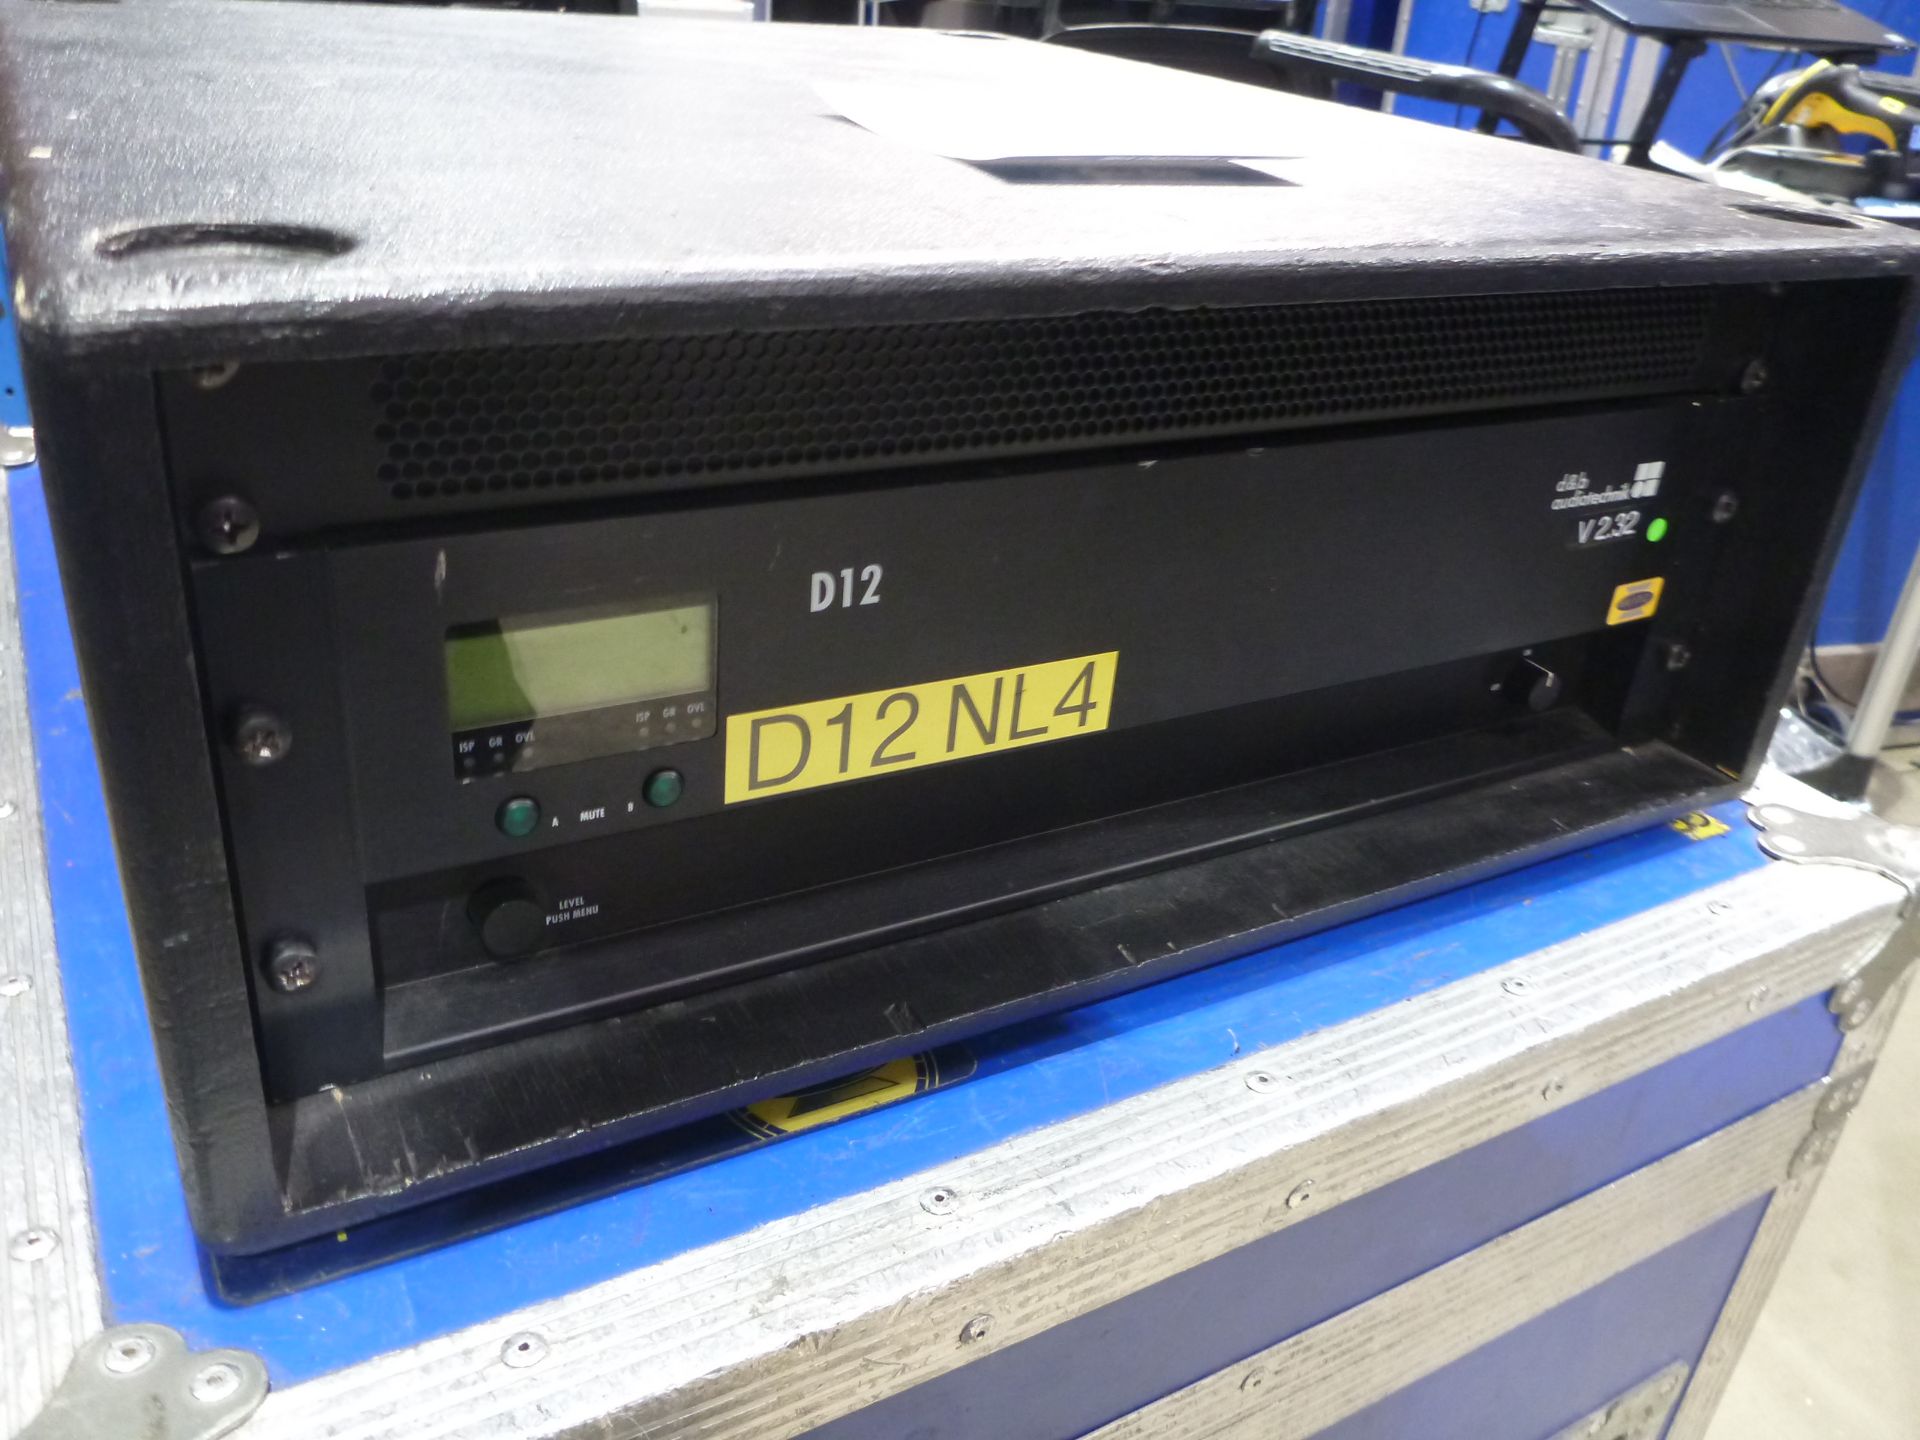 D & B Audiotecknik D12 NL4 2 Chnl Power Amplifier. Mounted in rack mount box, 13A to powercon cable. - Image 2 of 4